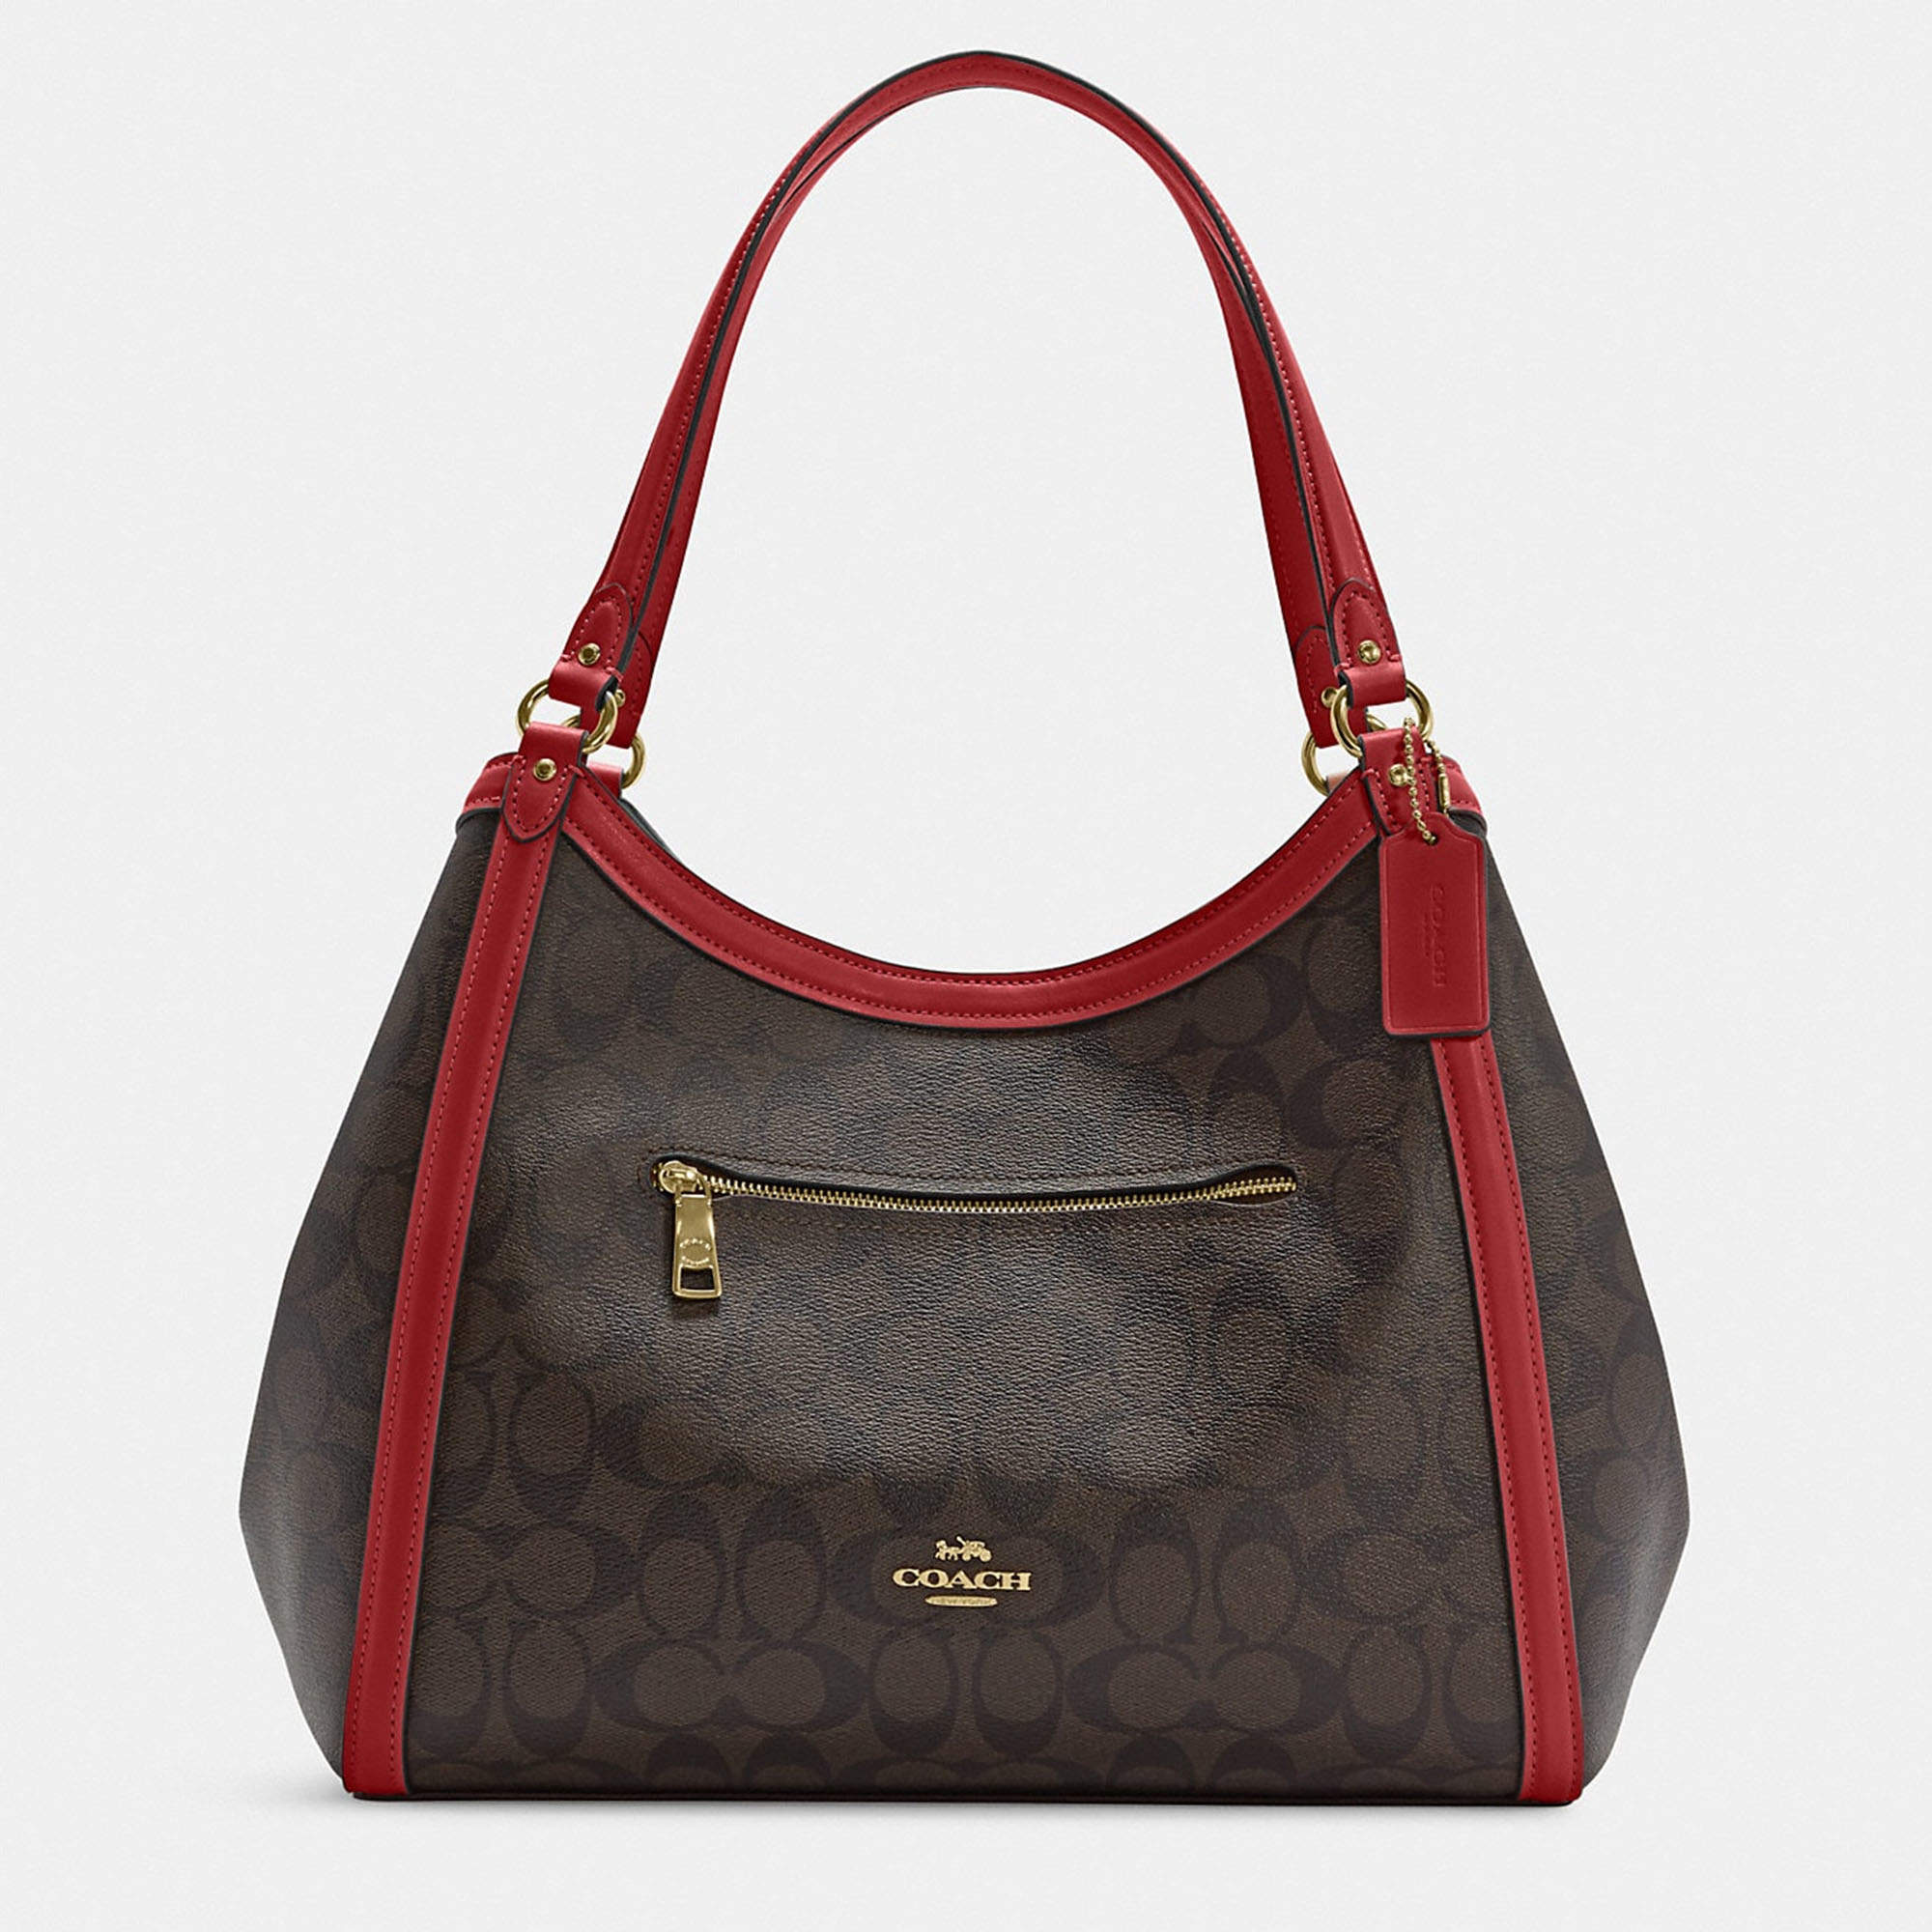 Coach Outlet Kristy Shoulder Bag In Signature Canvas in Brown/Red